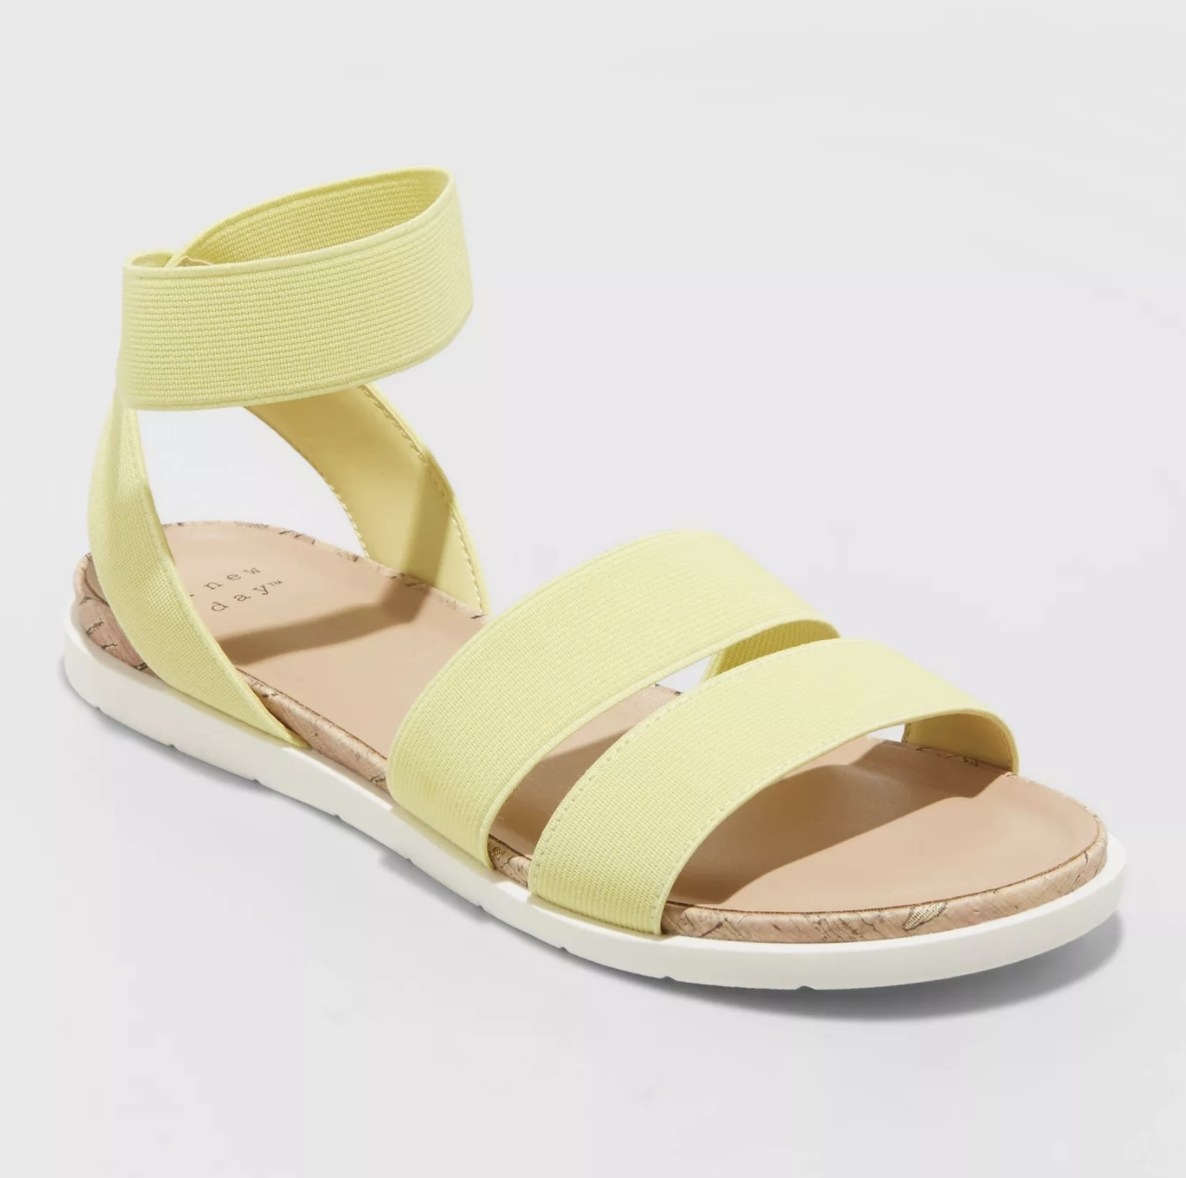 The bright yellow sandals have two toe straps and an ankle strap